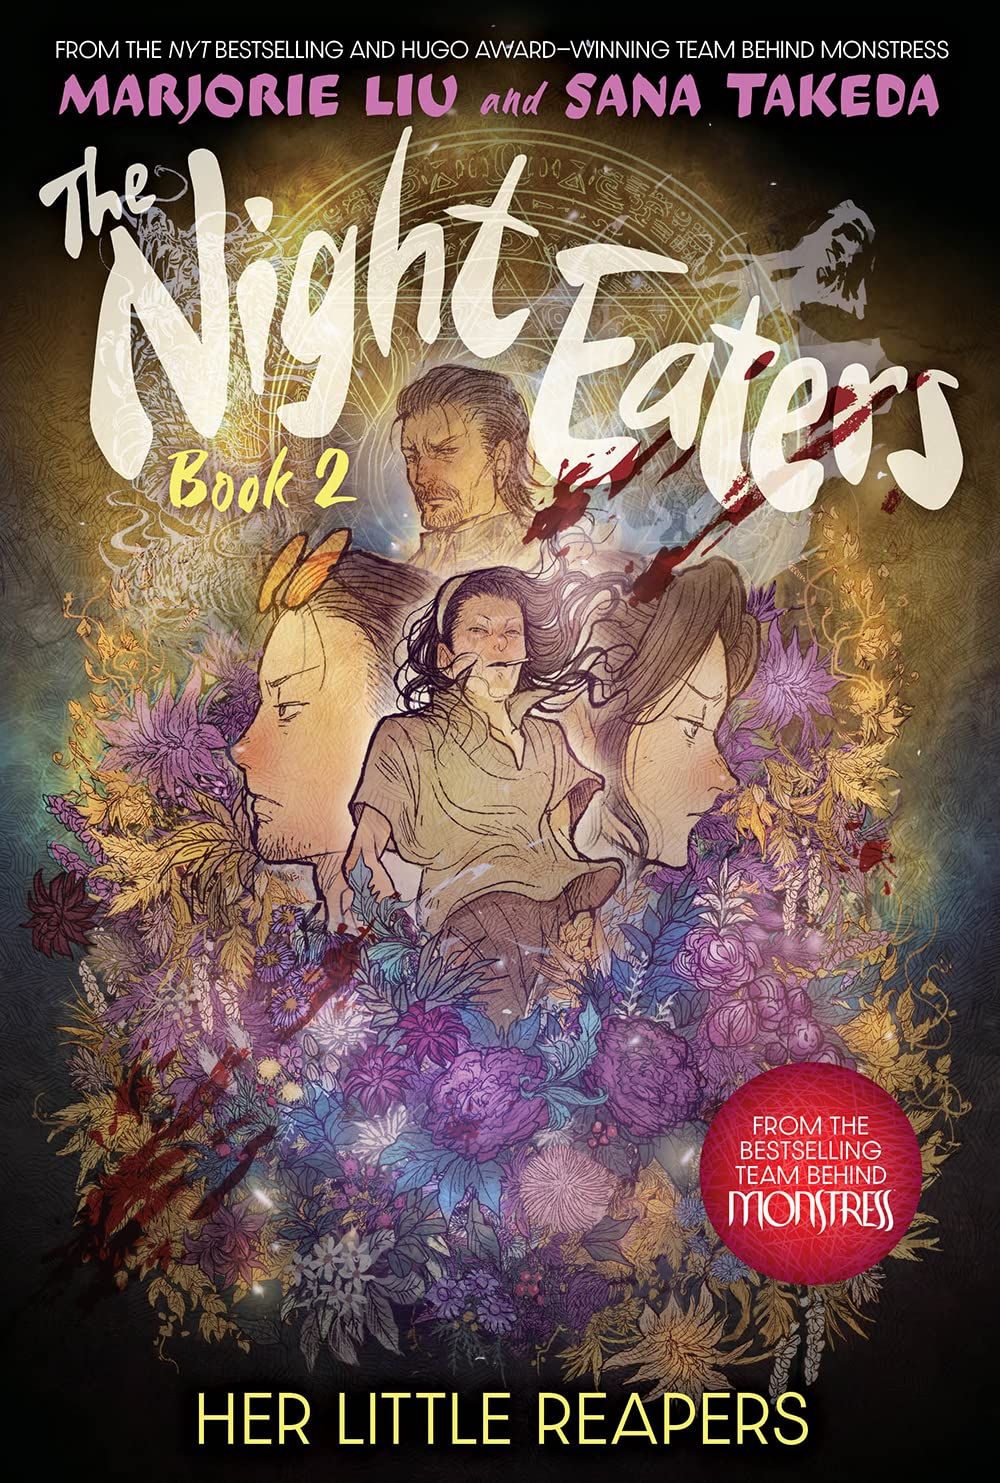 The Night Eaters Book 2: Her Little Reapers by Marjorie Liu and Sana Takeda - book cover